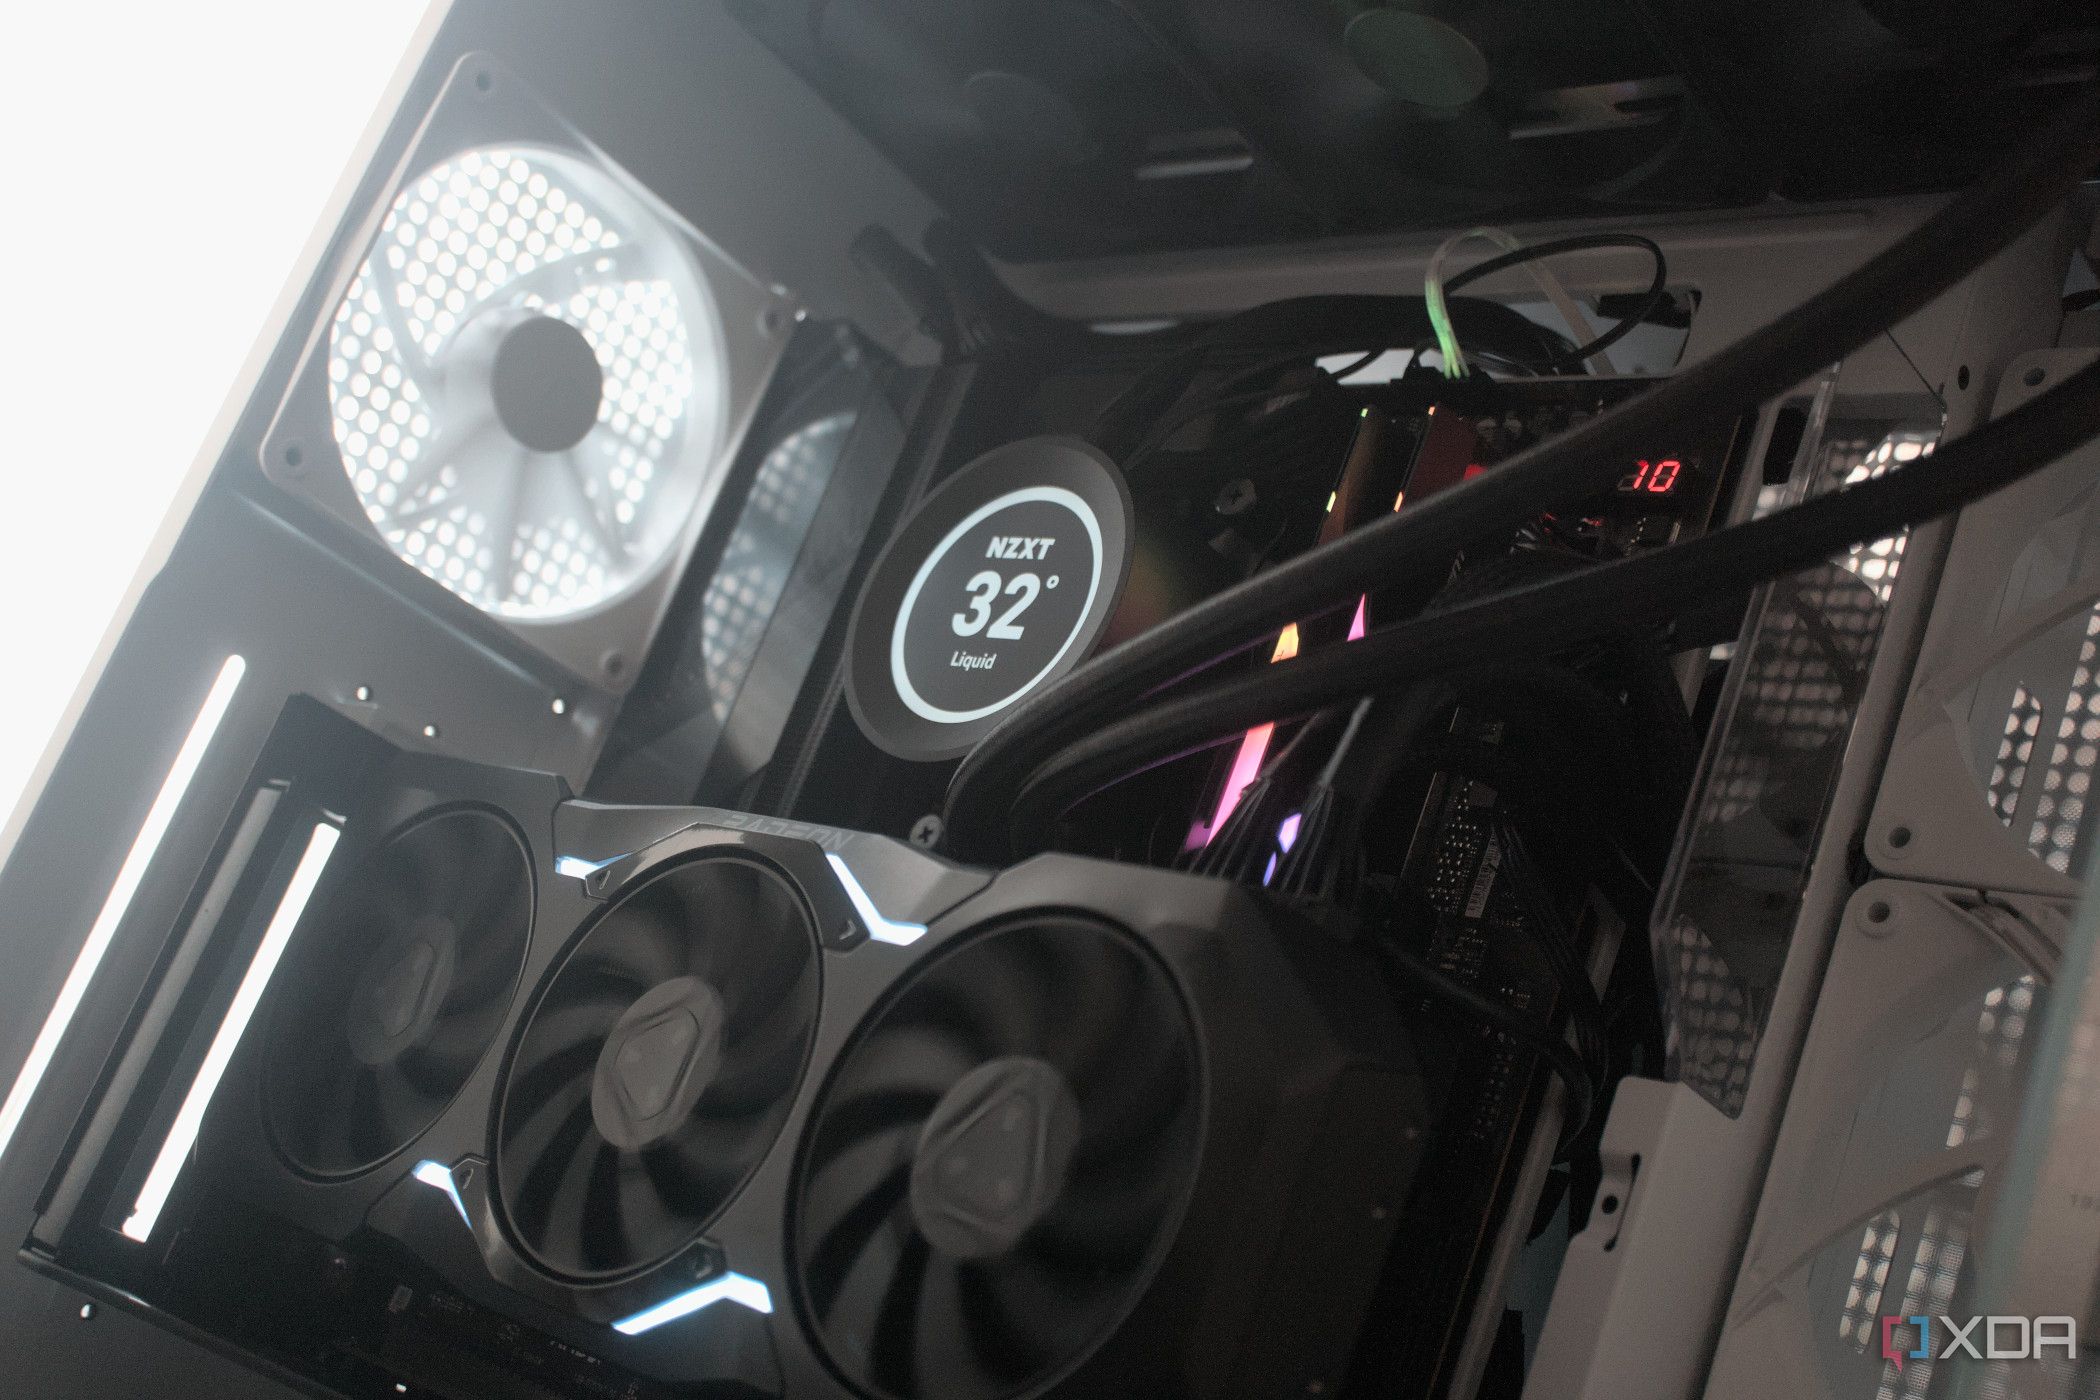 Custom PCs are great, but here are 4 compelling reasons why they're not right for you